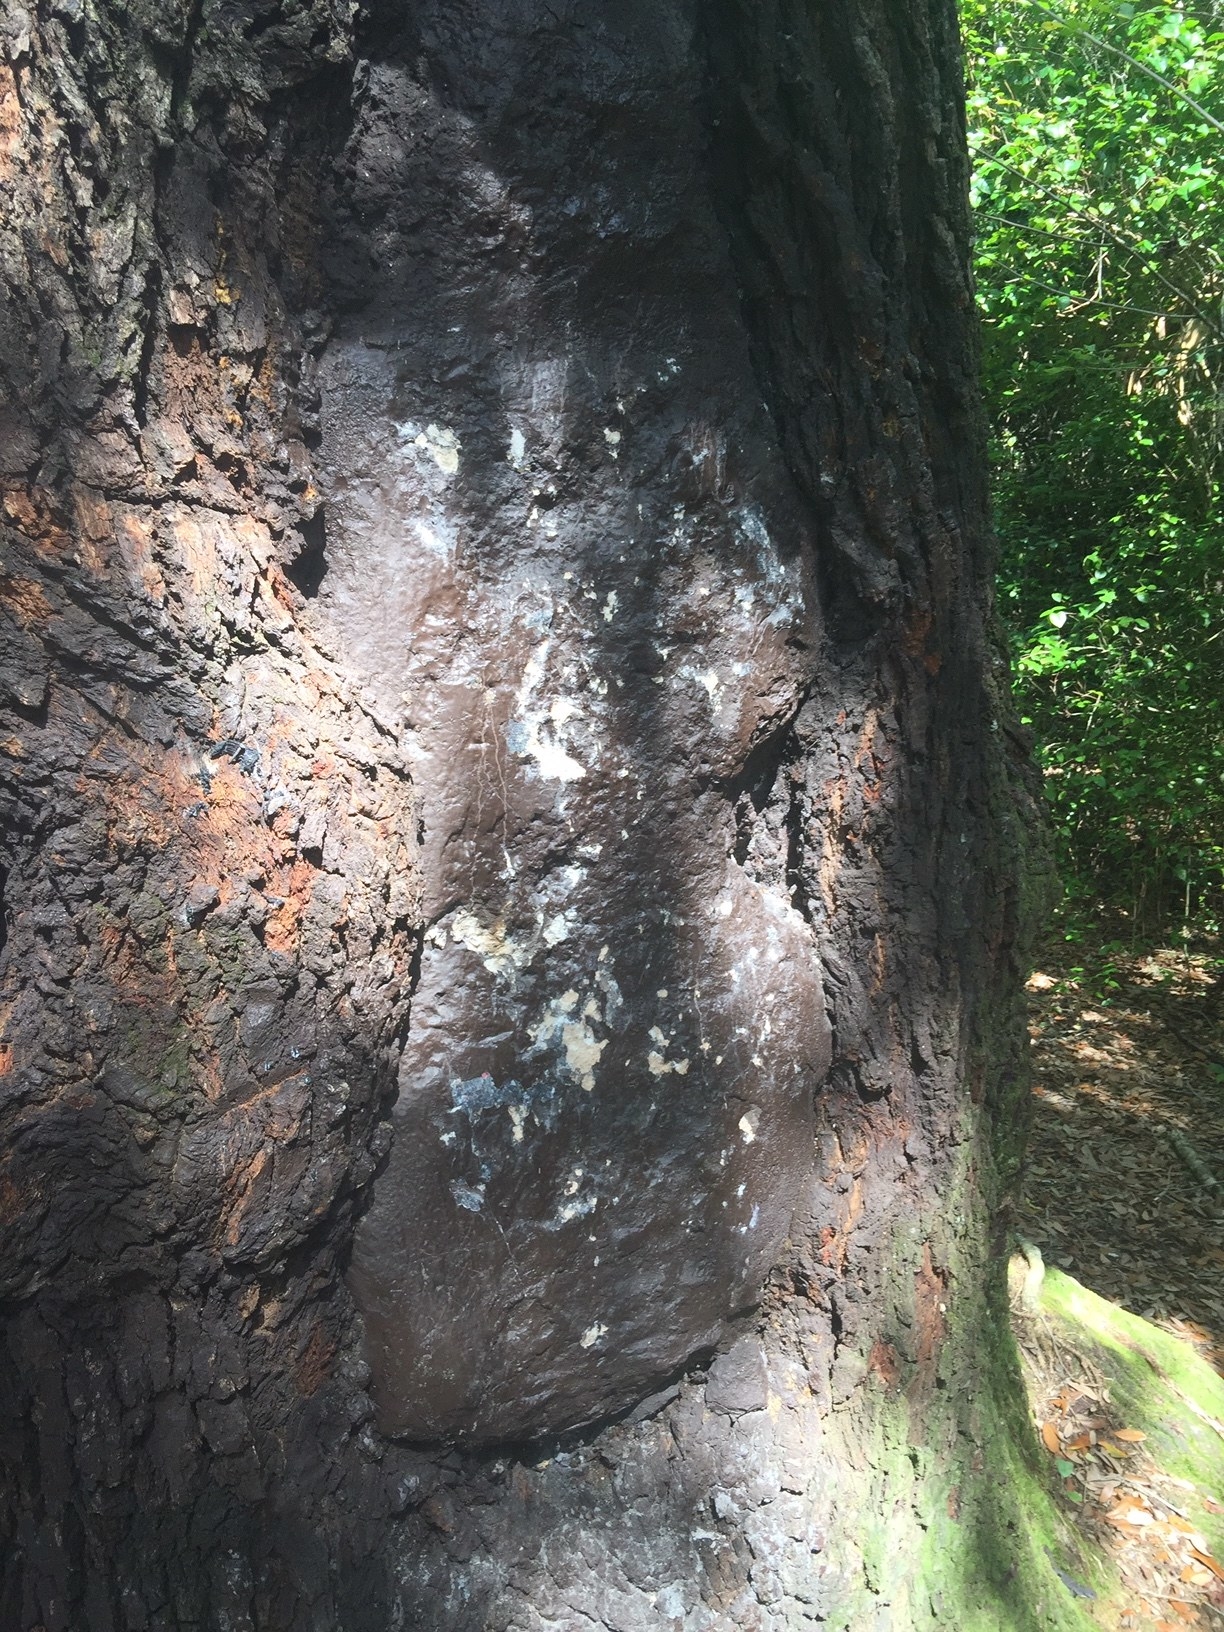 A large knot on the side of an oak tree